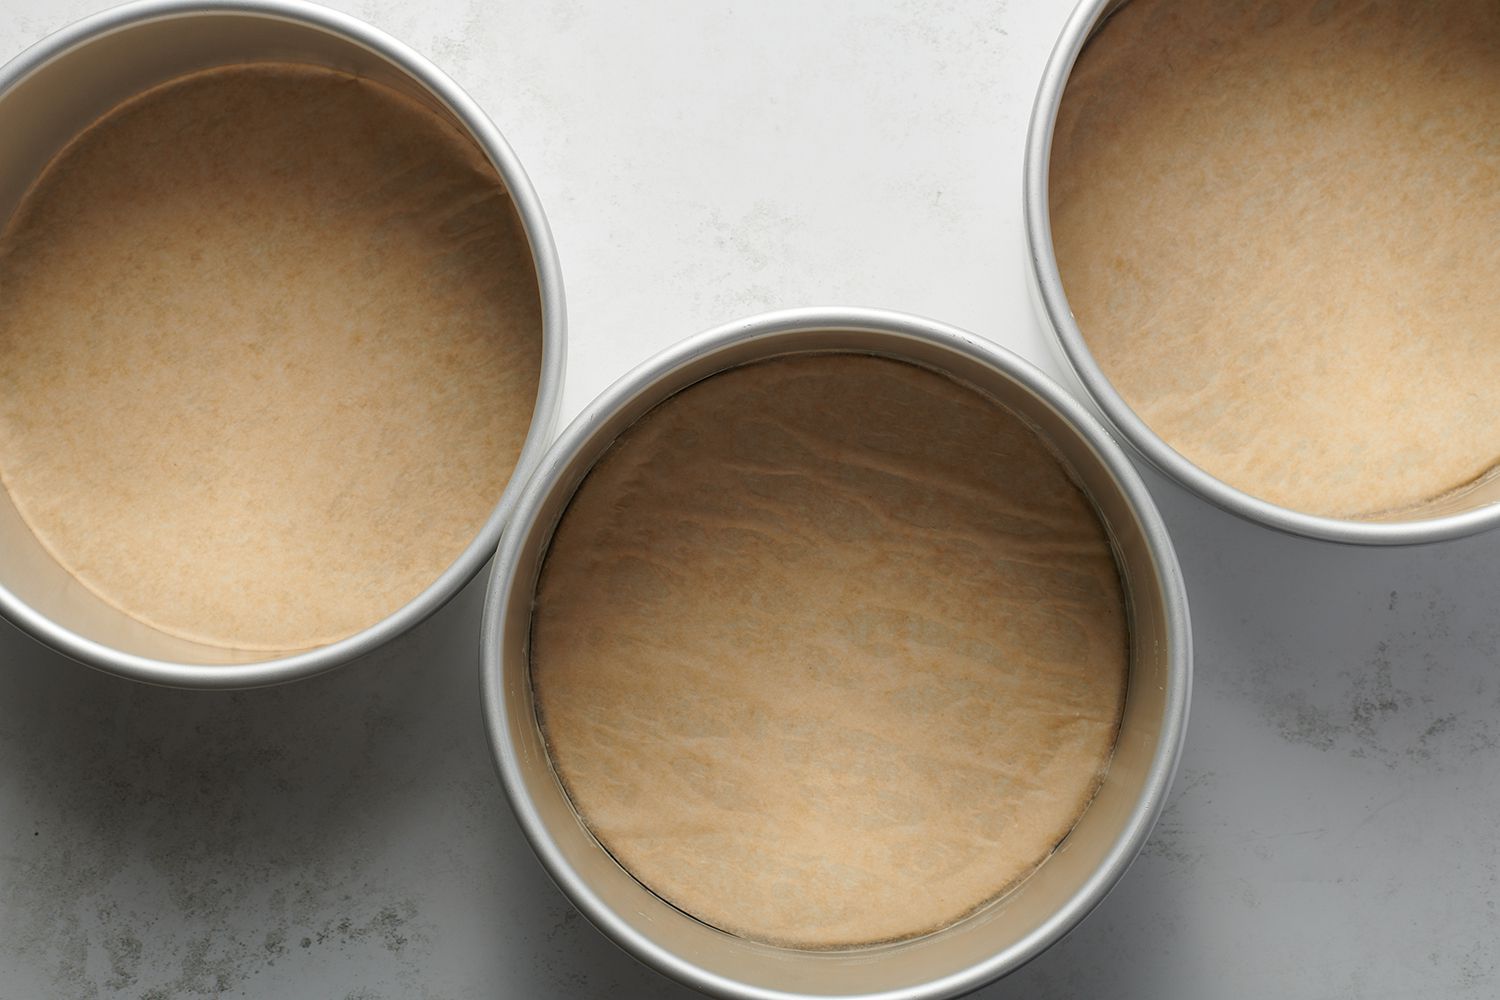 round cake pans lined with parchment paper